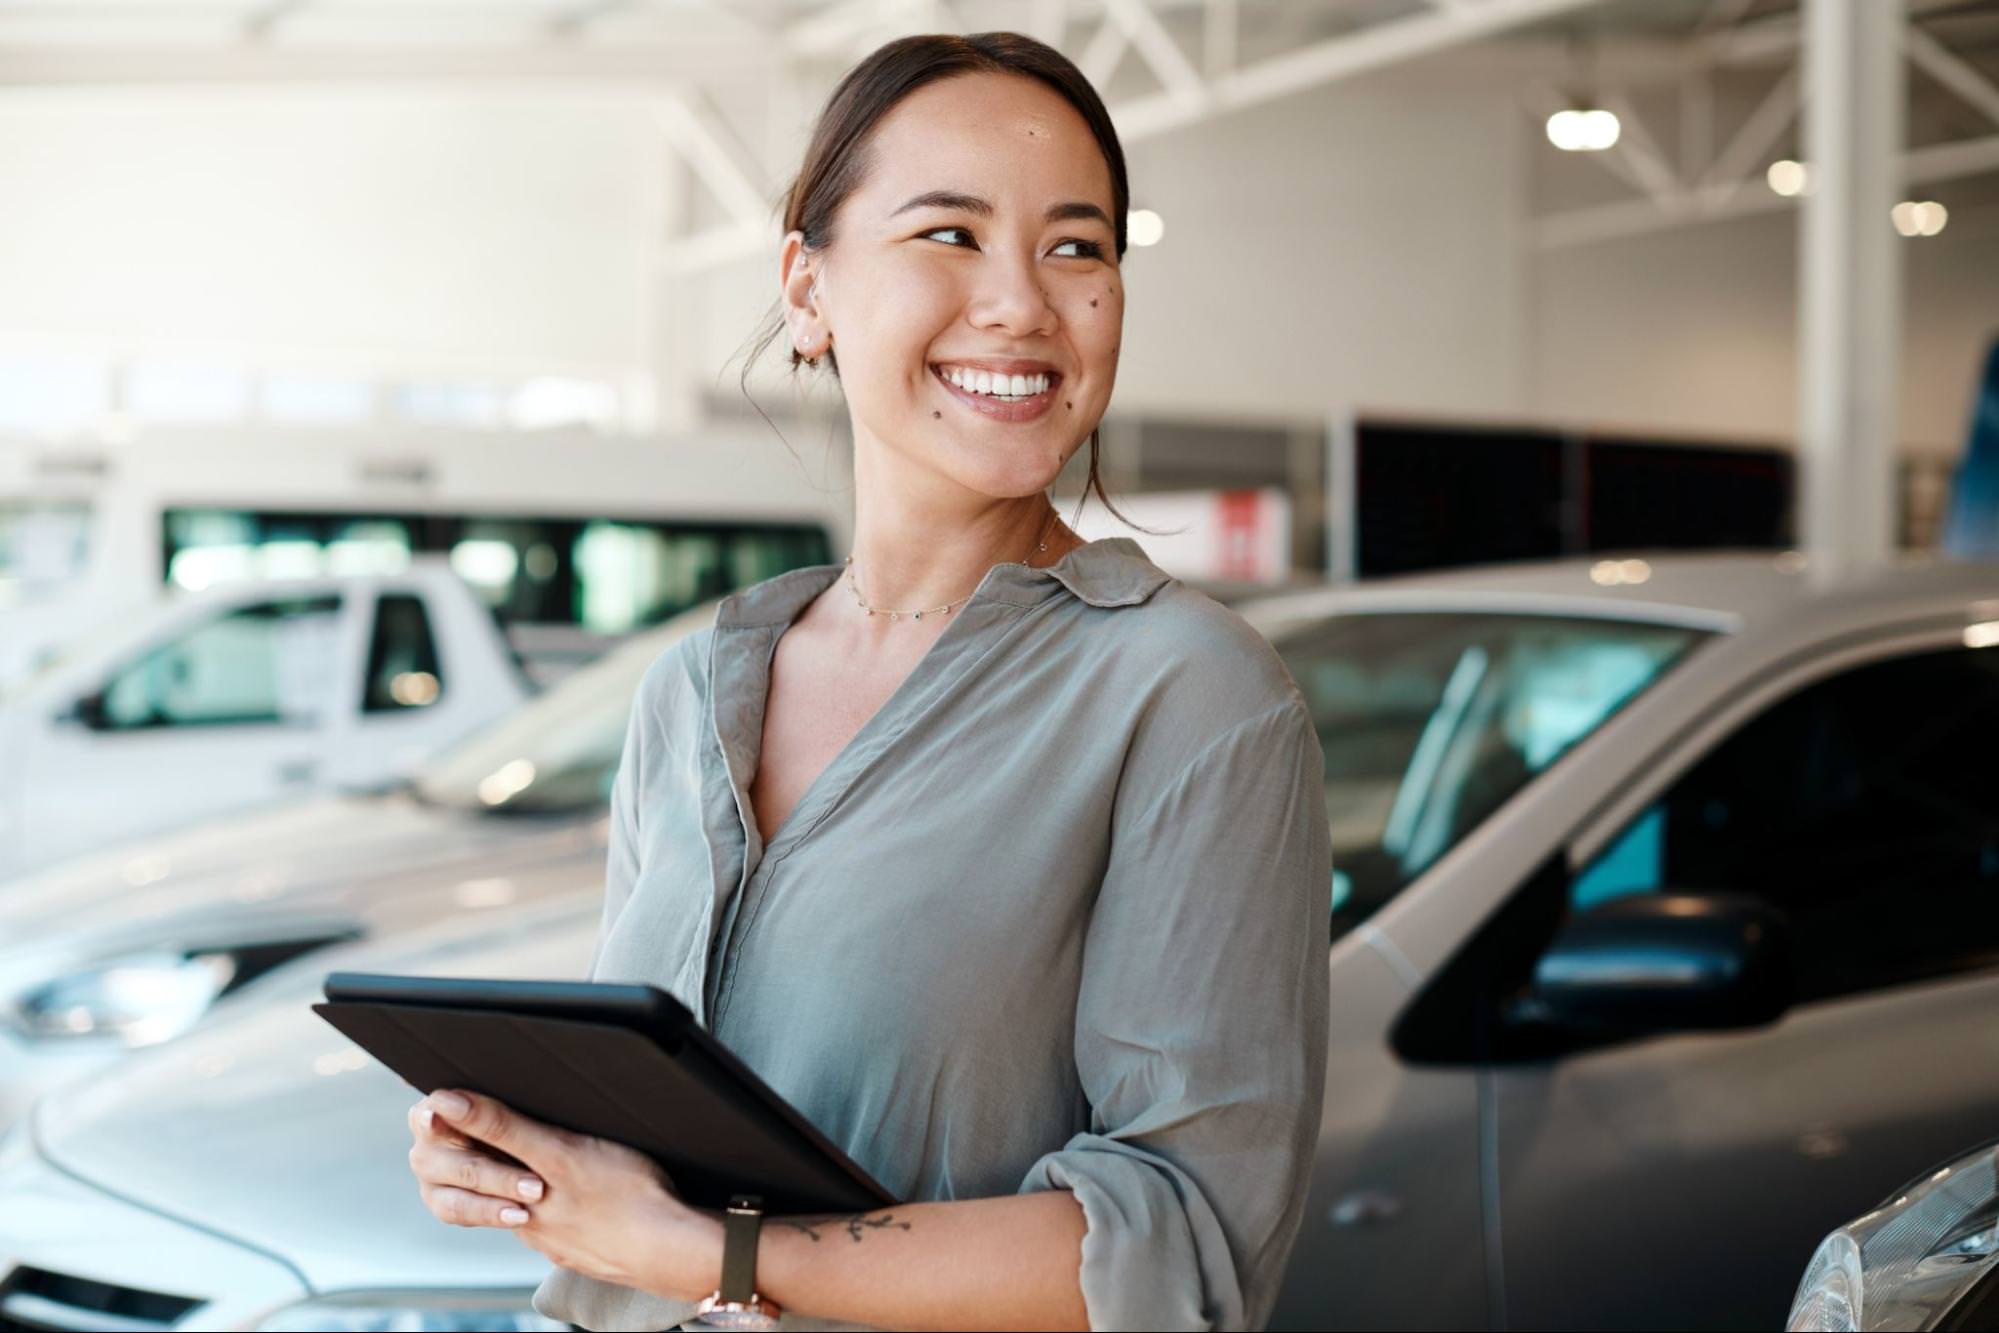 A smiling car salesperson standing in a showroom with cars in the background. She is holding a tablet, appearing friendly and professional, ready to assist customers.